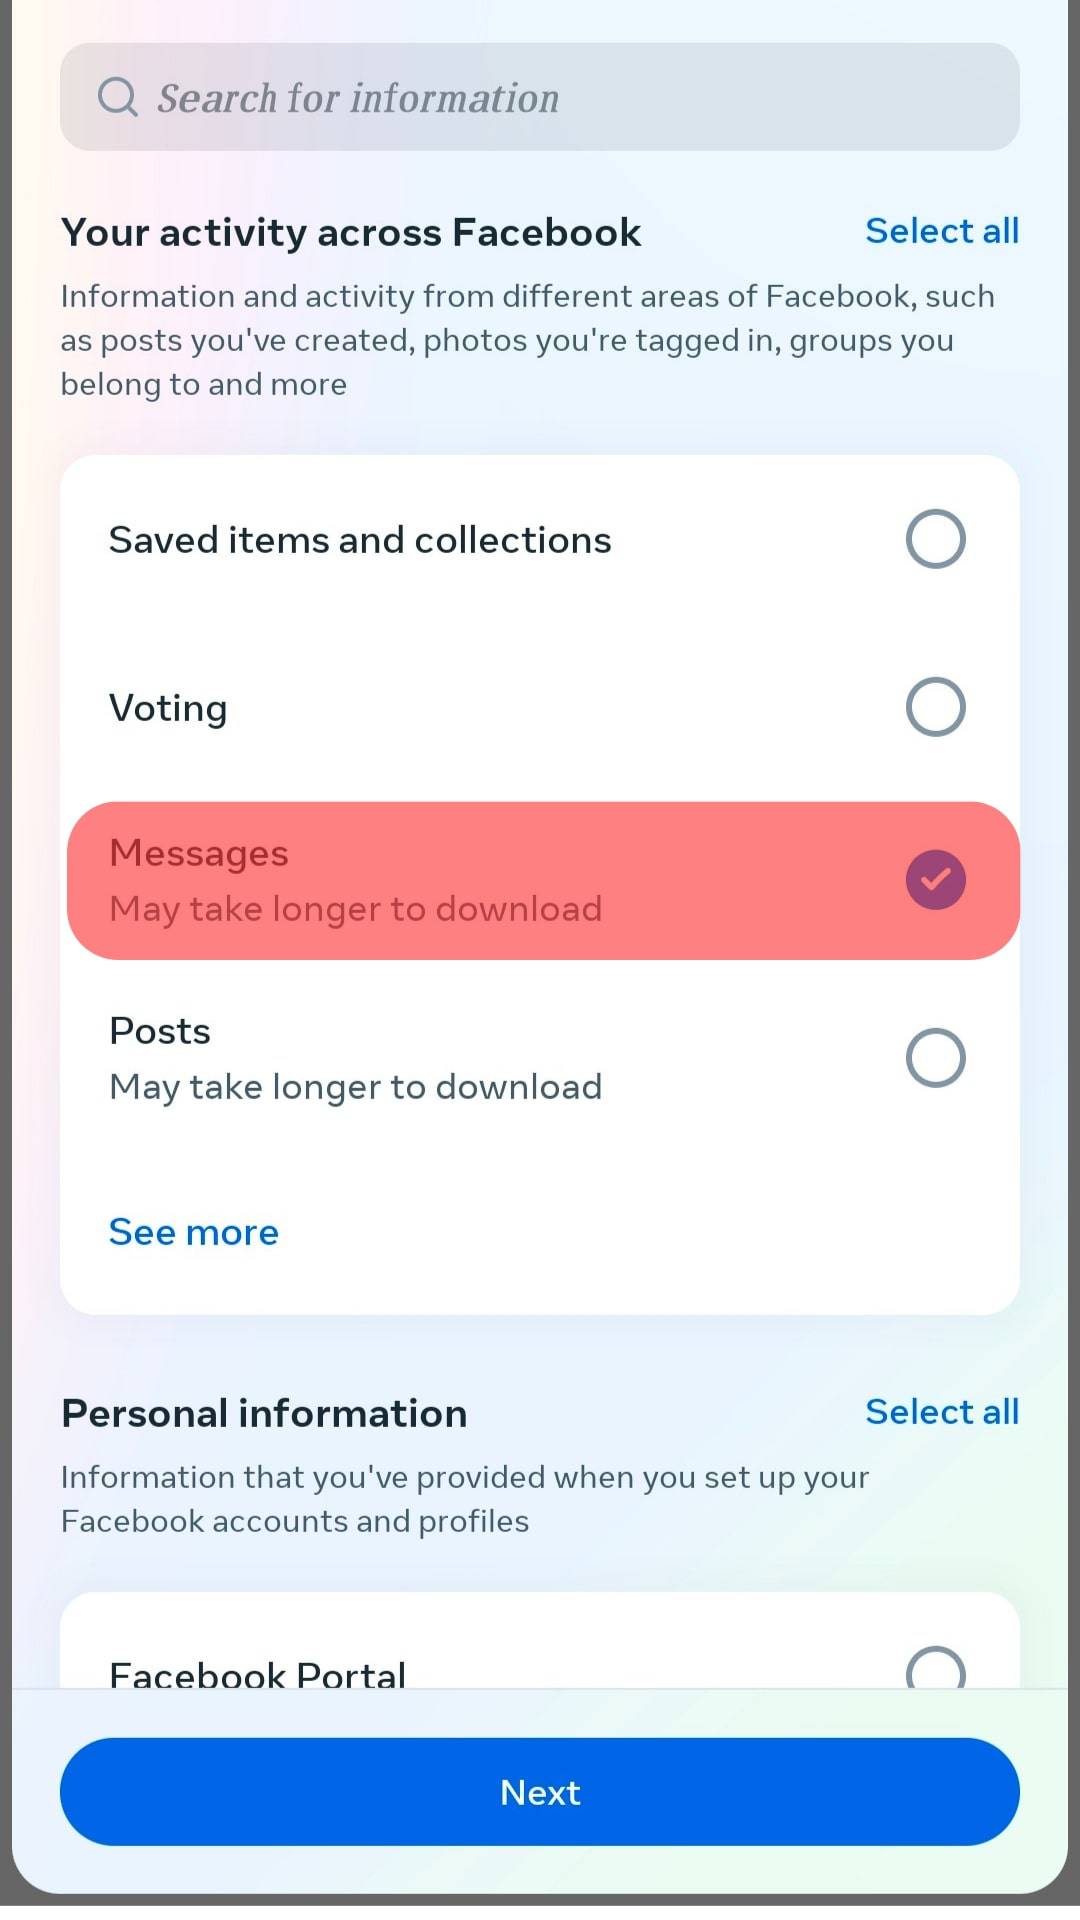 Deselect All Options Except Messages.